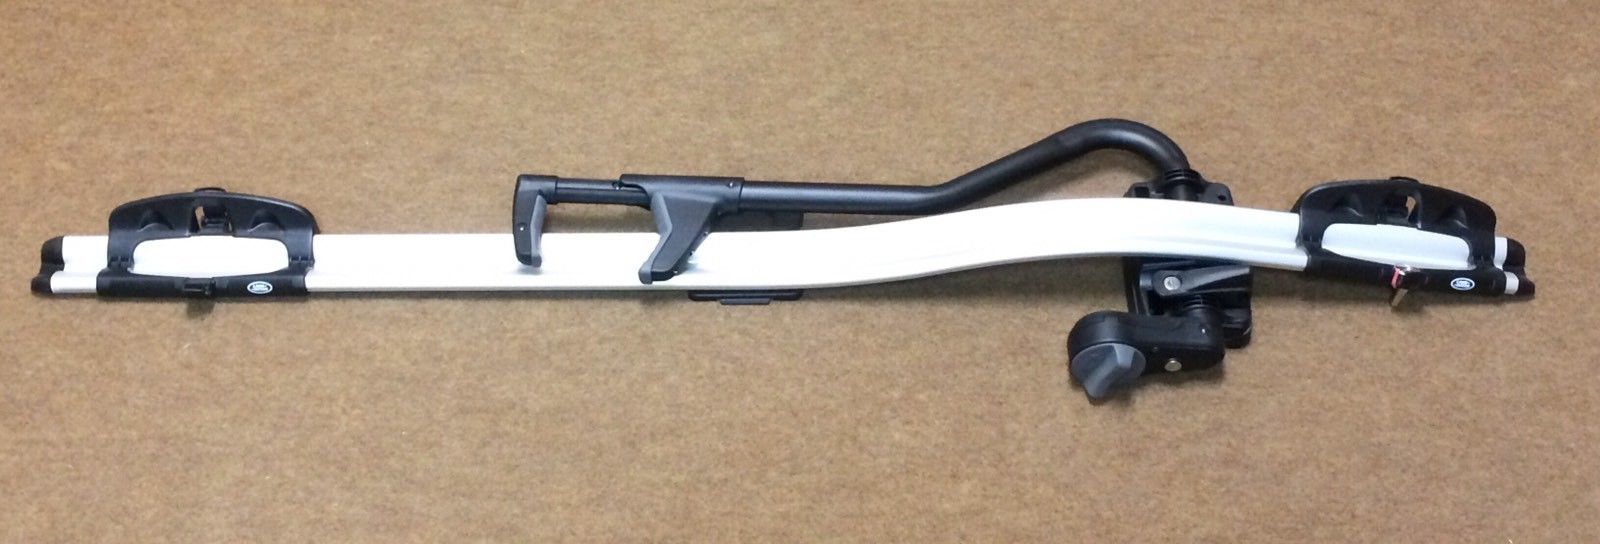 LAND ROVER RANGE ROVER ROOF MOUNTED BIKE CYCLE CARRIER – VPLZR0186.